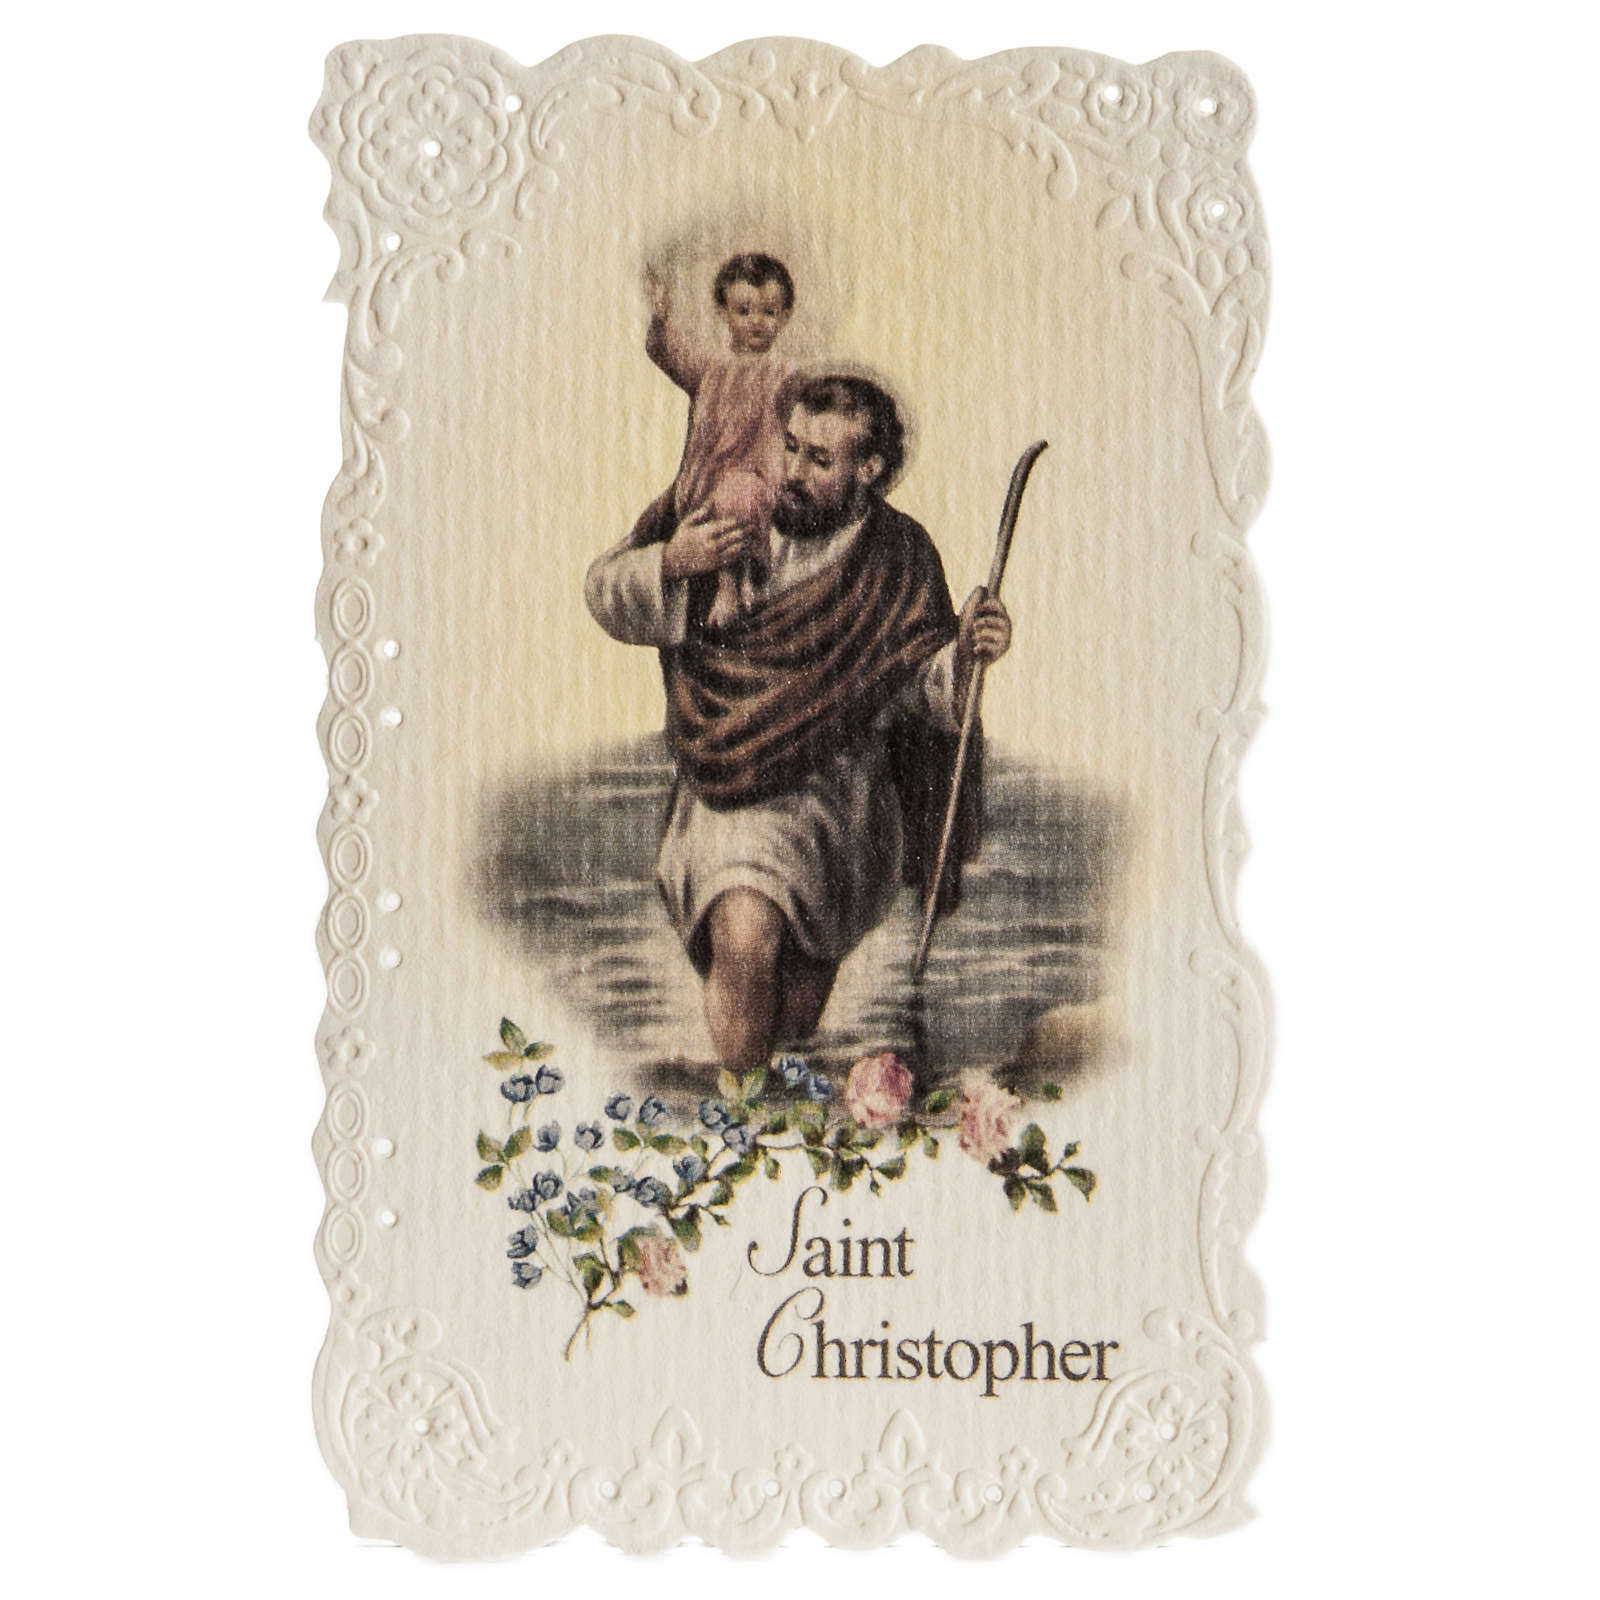 Saint Christopher holy card with prayer in ENGLISH